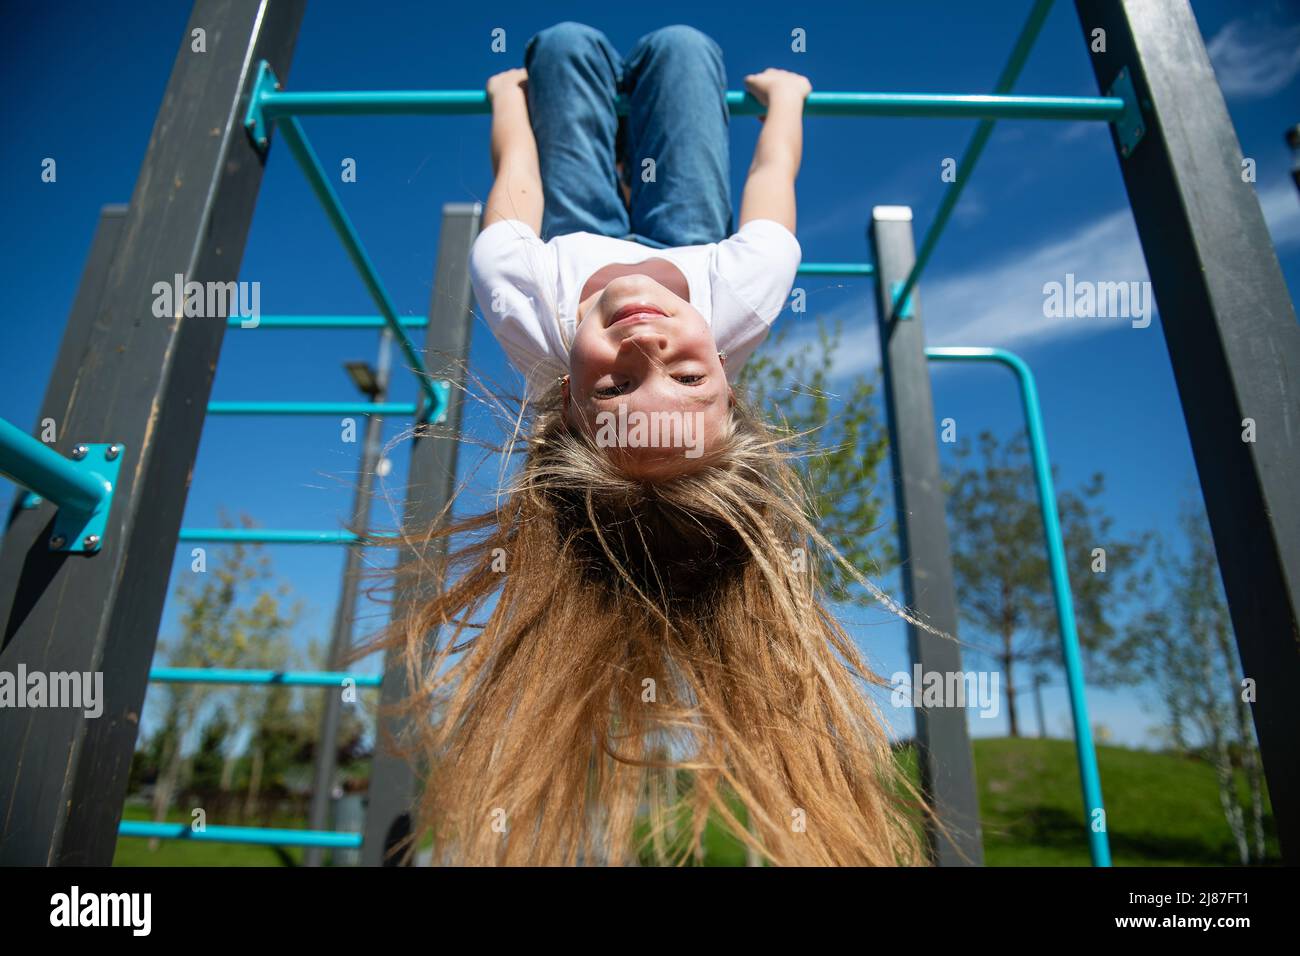 A beautiful teenage girl hanging upside down on the horizontal bar. Hair is blowing in the wind. Bottom view, wide angle. Stock Photo